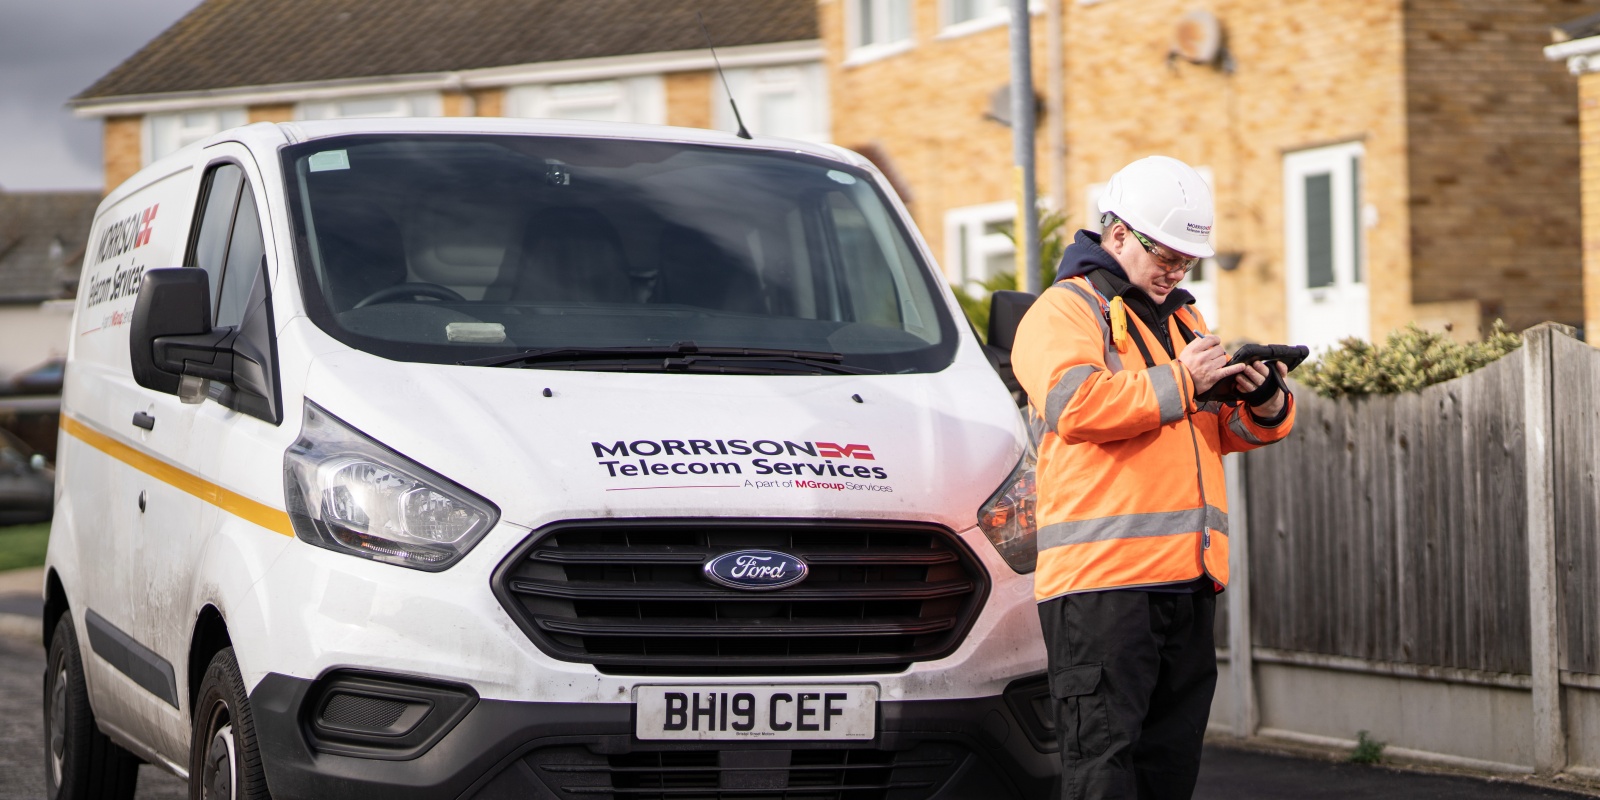  HELPING CONNECT 25 MILLION PREMISES TO A FAST-FIBRE NETWORK